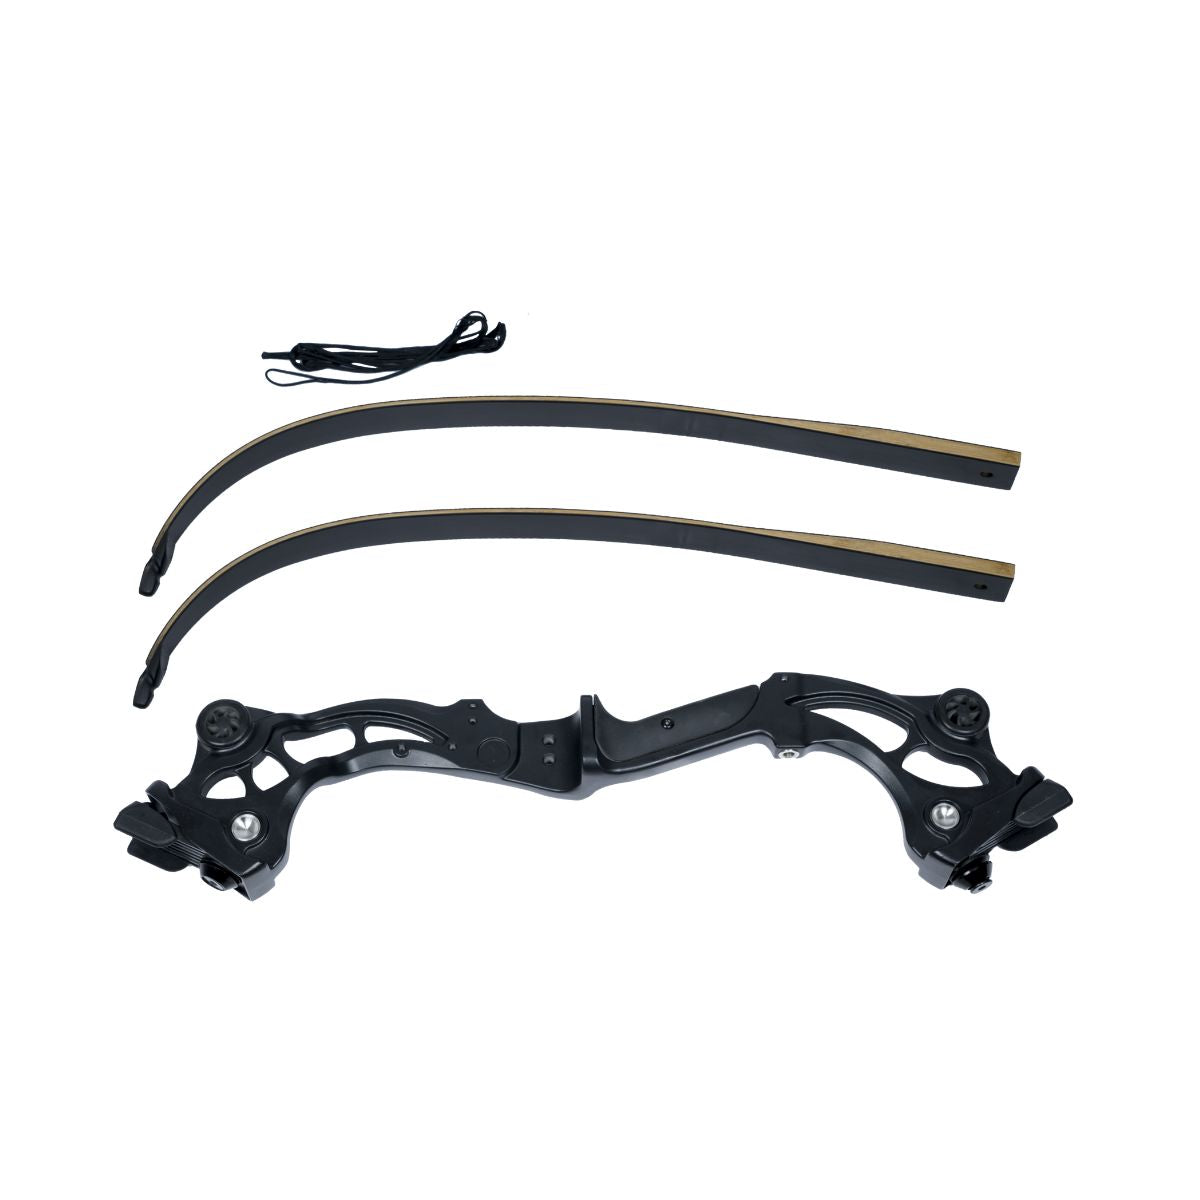 Scorpion Re-Curve Bow - AS-R163 4